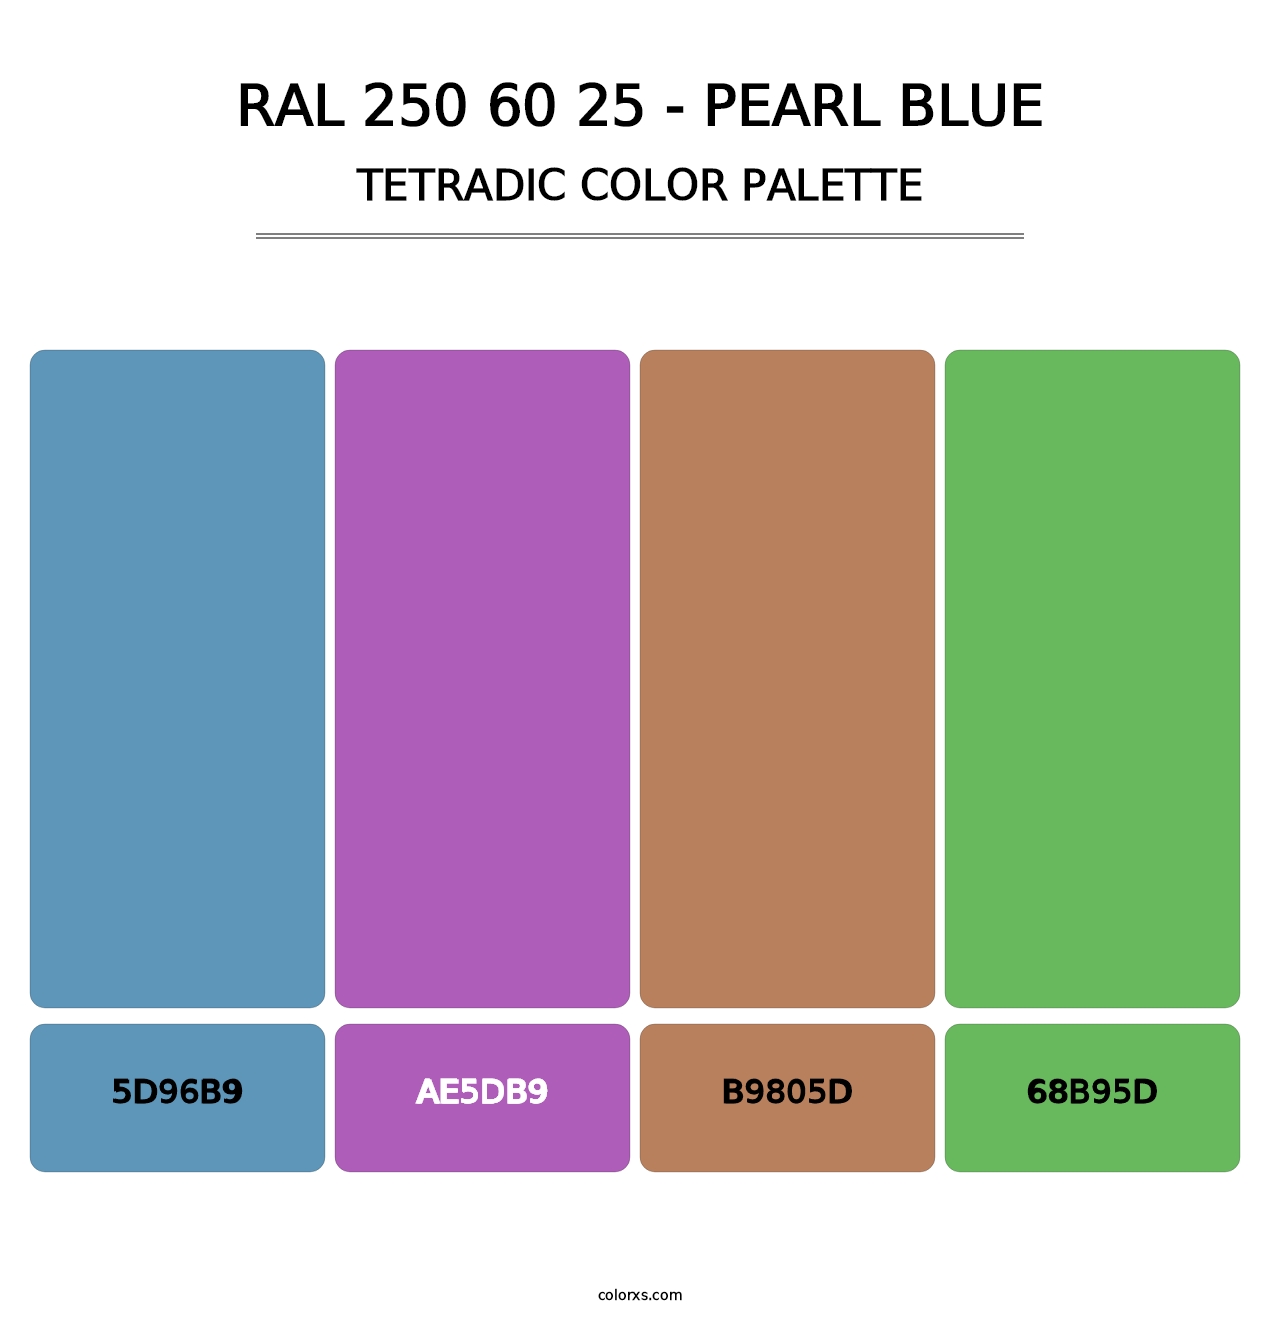 RAL 250 60 25 - Pearl Blue - Tetradic Color Palette